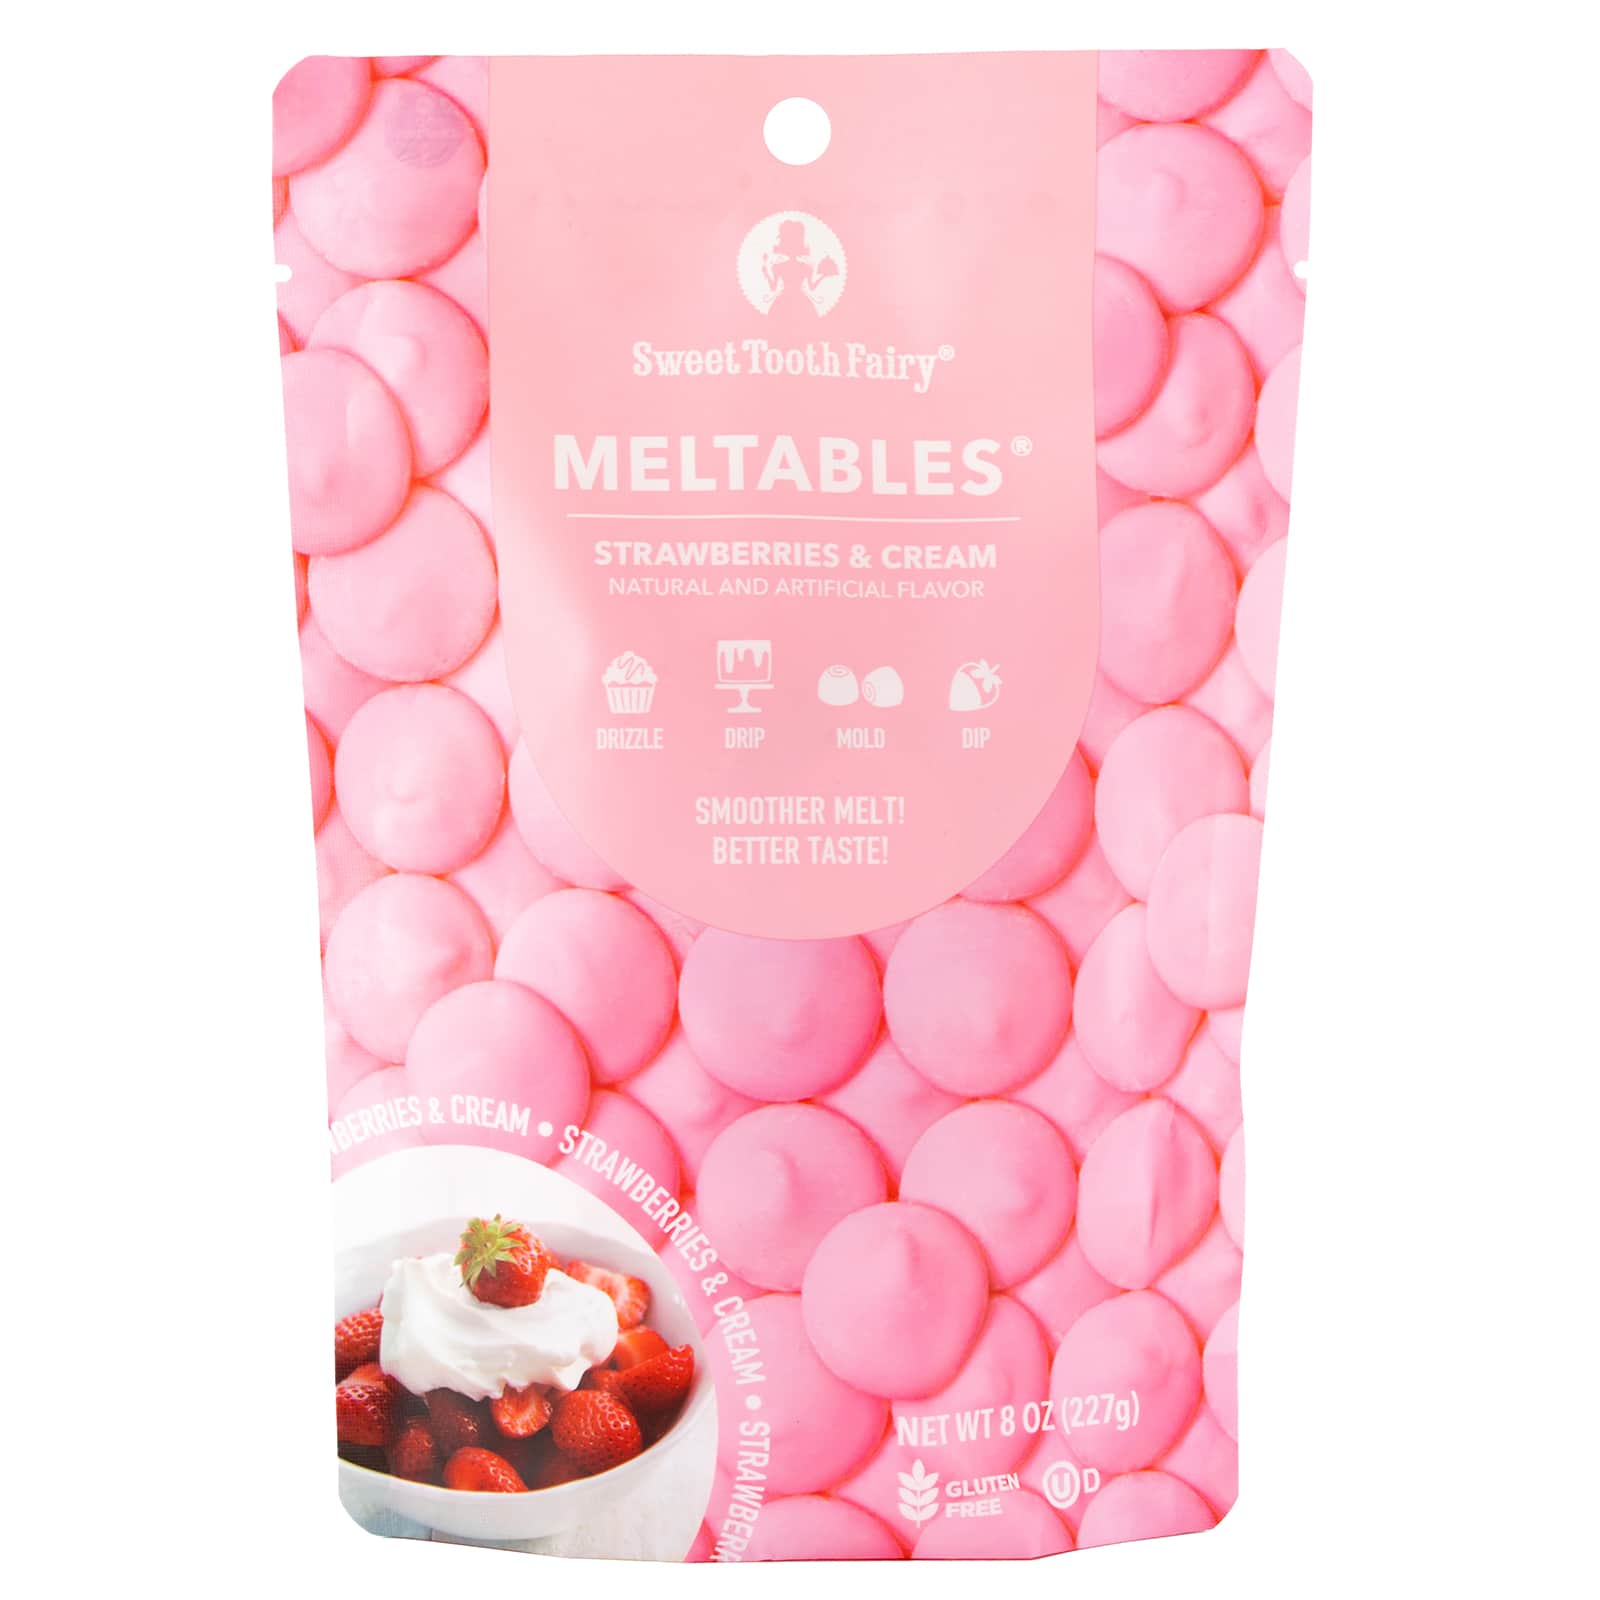 Sweet Tooth Fairy® Flavored Meltables™, 8oz.